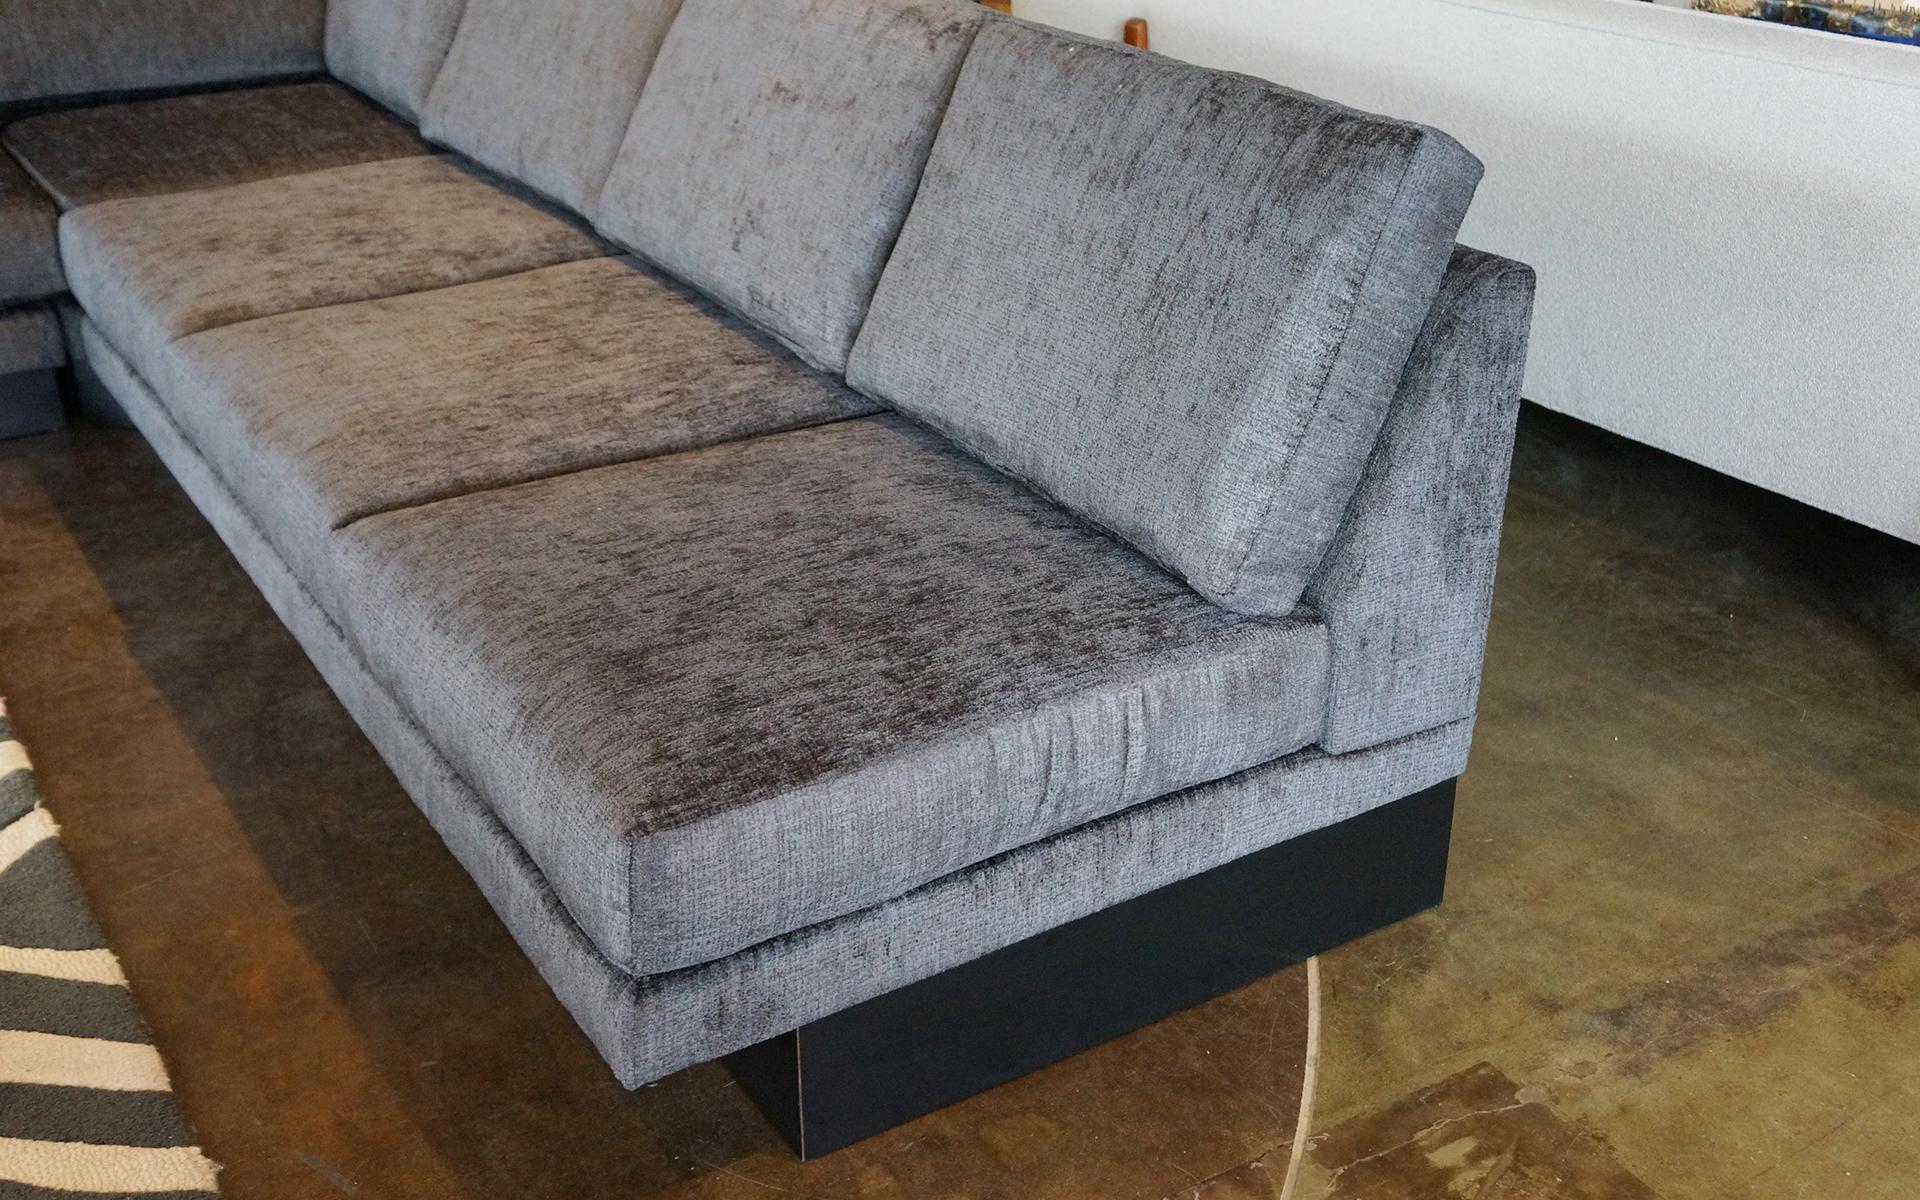 Large three-piece sectional sofa designed by Milo Baughman for Thayer Coggin. Consists of a pair of three-seat armless sofas and a corner piece making for any number of configurations beyond the obvious corner L shape configuration. Three-seat sofa